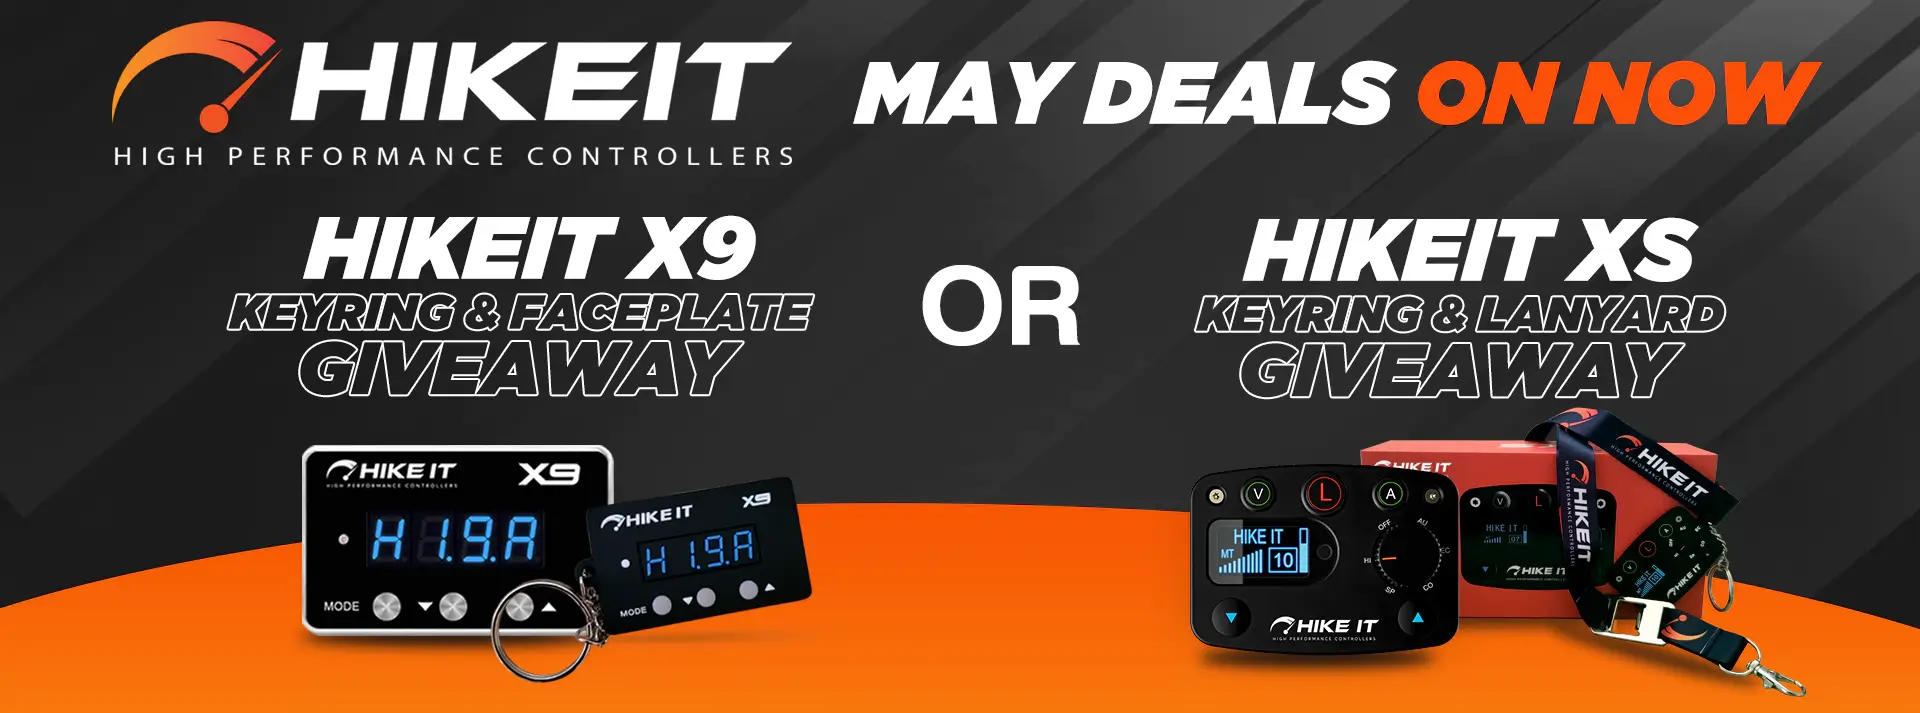 HIKEIT MAY DEALS ON NOW